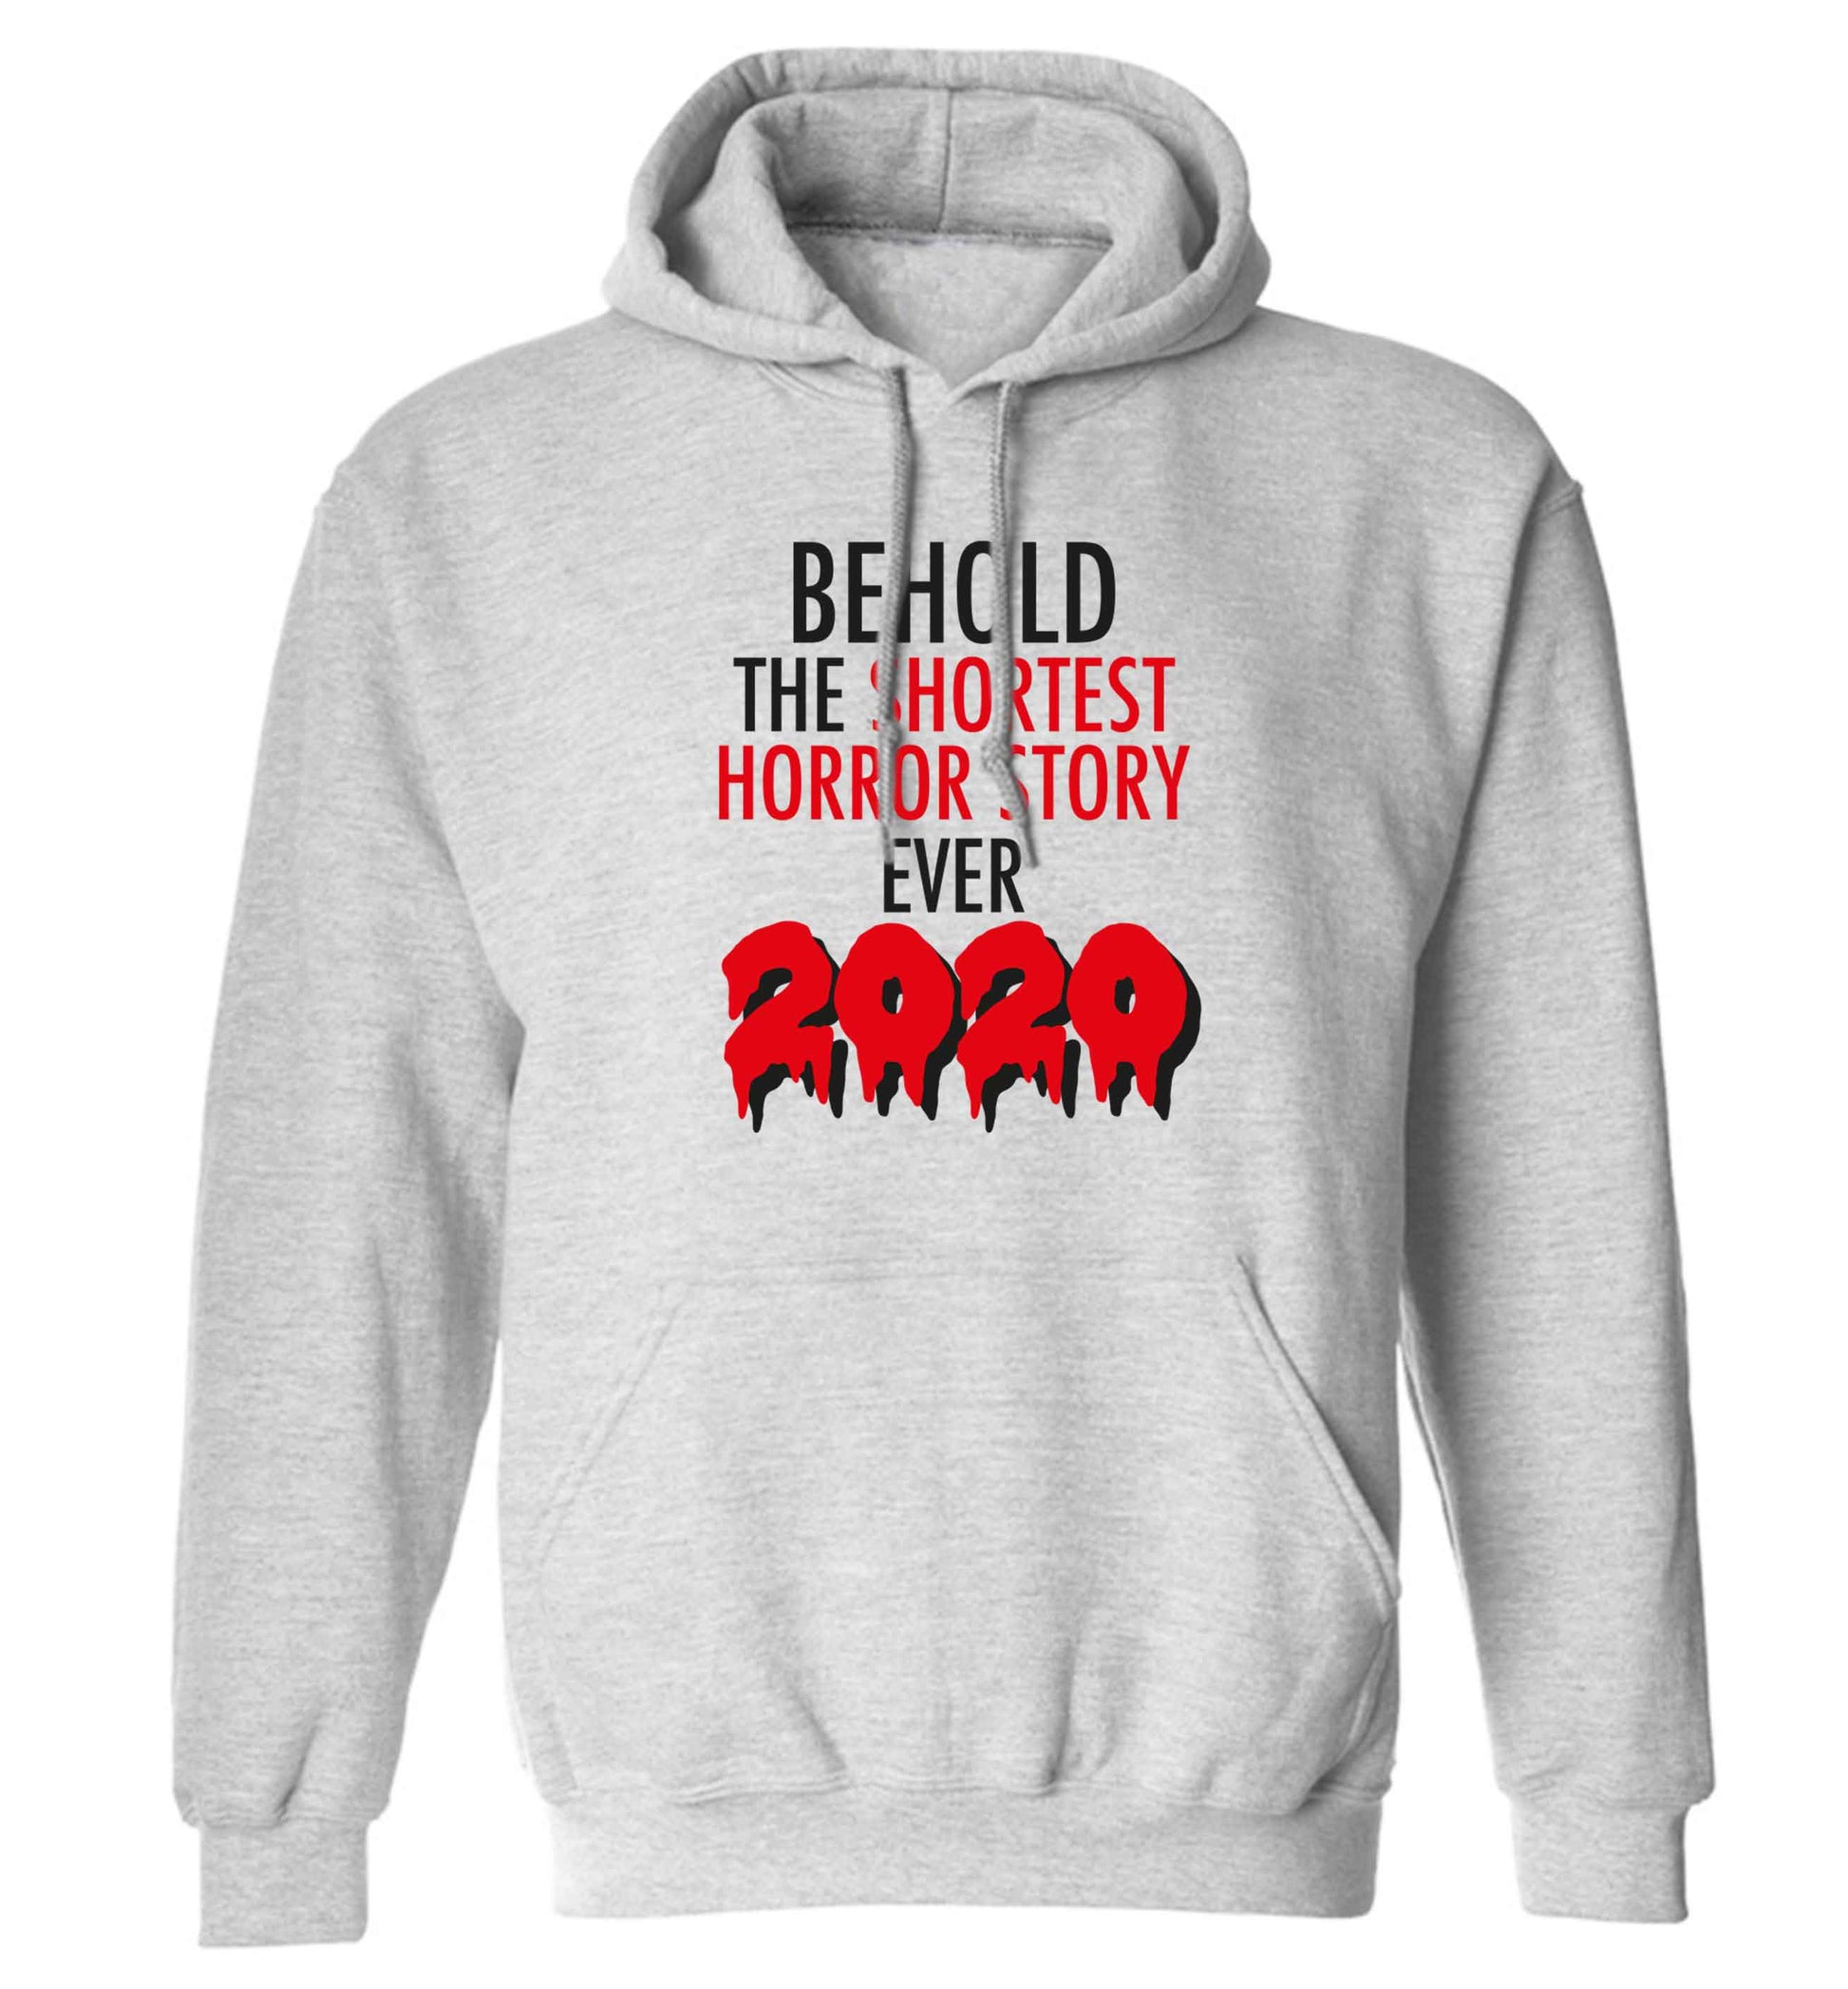 Shortest horror story ever 2020 adults unisex grey hoodie 2XL